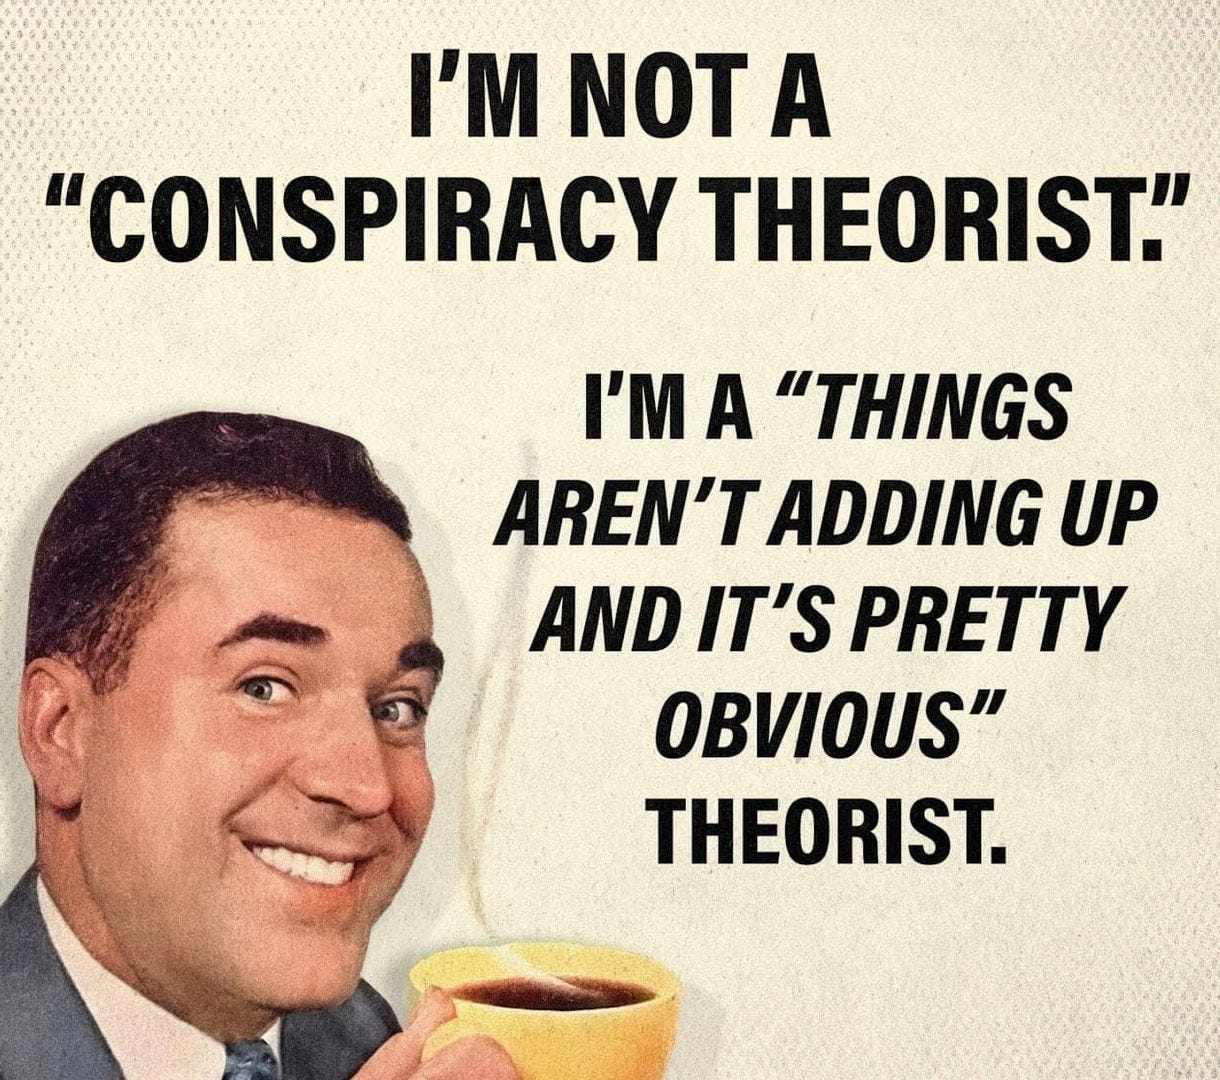 May be an image of 1 person and text that says 'I'M NOT A "CONSPIRACY THEORIST." I'M A "THINGS AREN'T ADDING UP AND IT'S PRETTY OBVIOUS" THEORIST.'